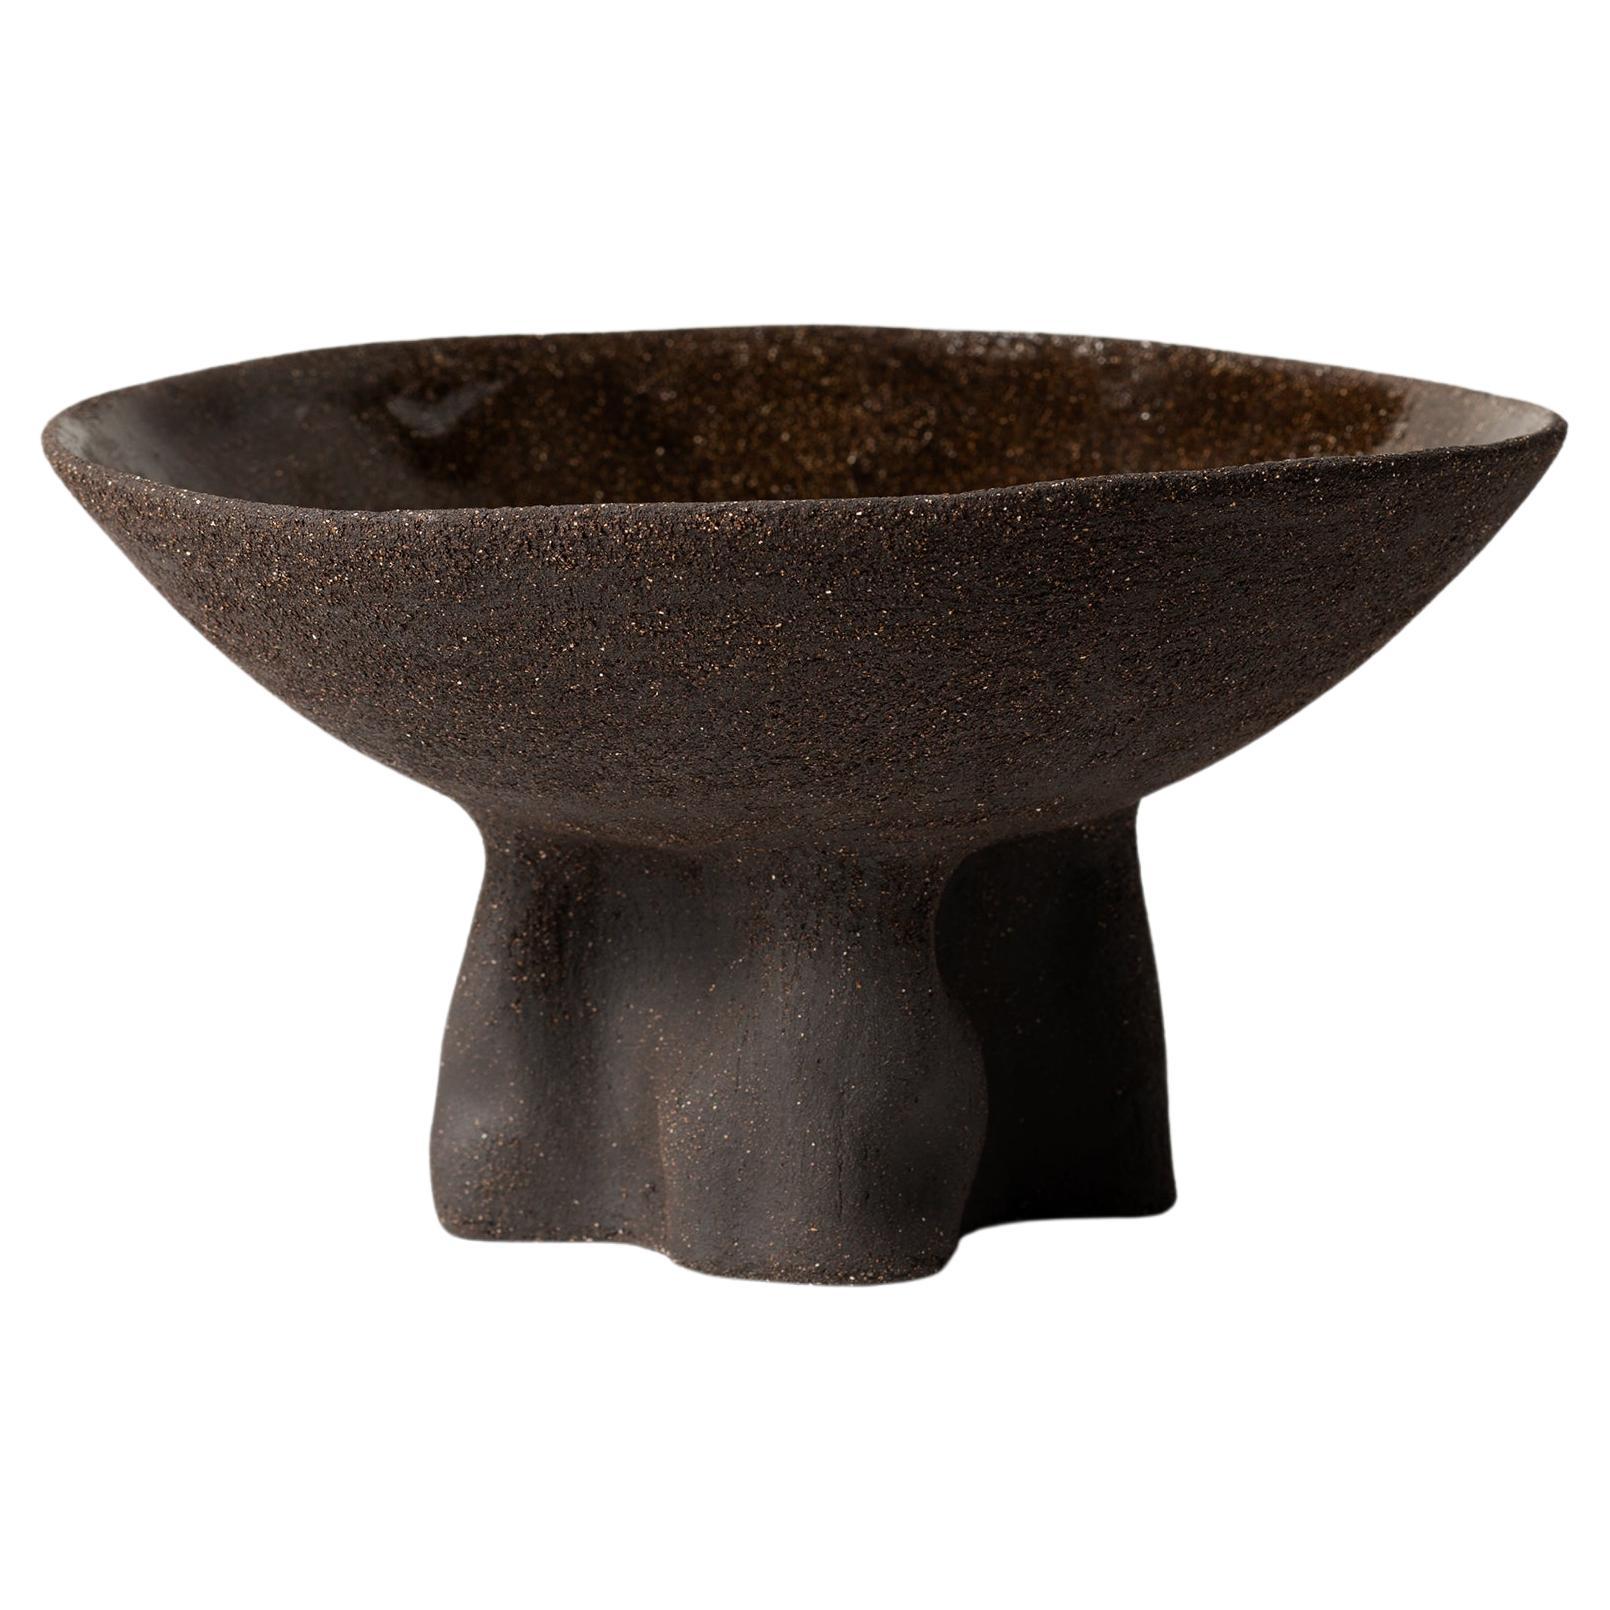 Fruit Bowl with Folded Stand For Sale